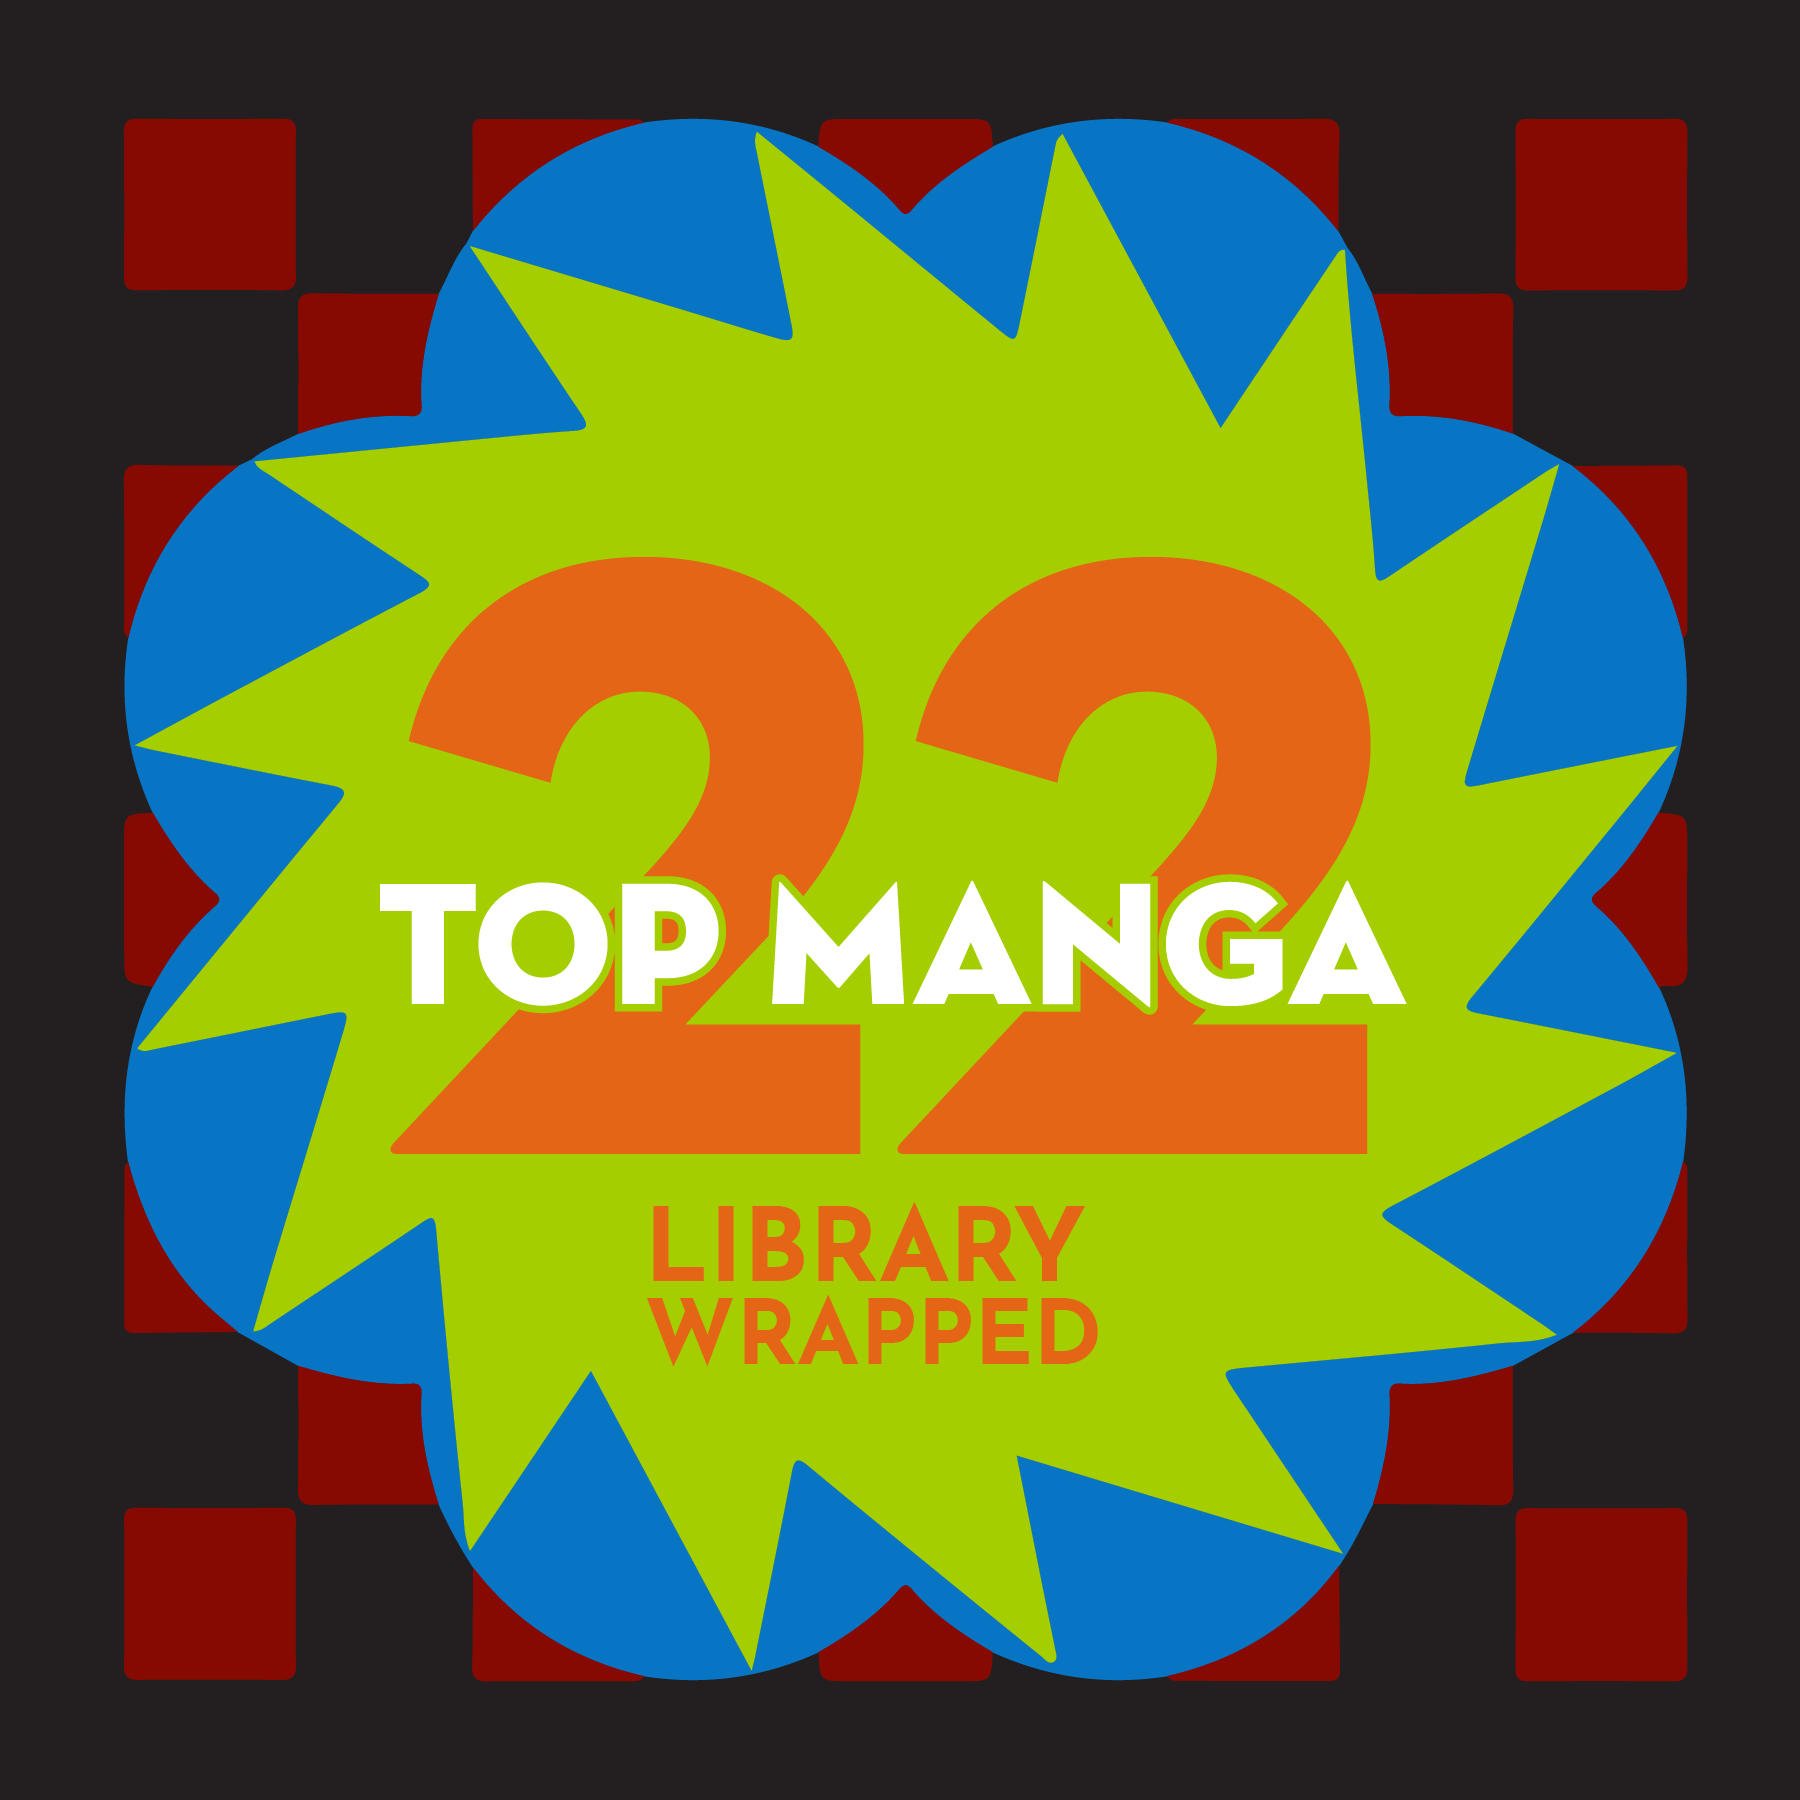 A graphic says 22 Library Wrapped Top Manga Series over a red plaid background.